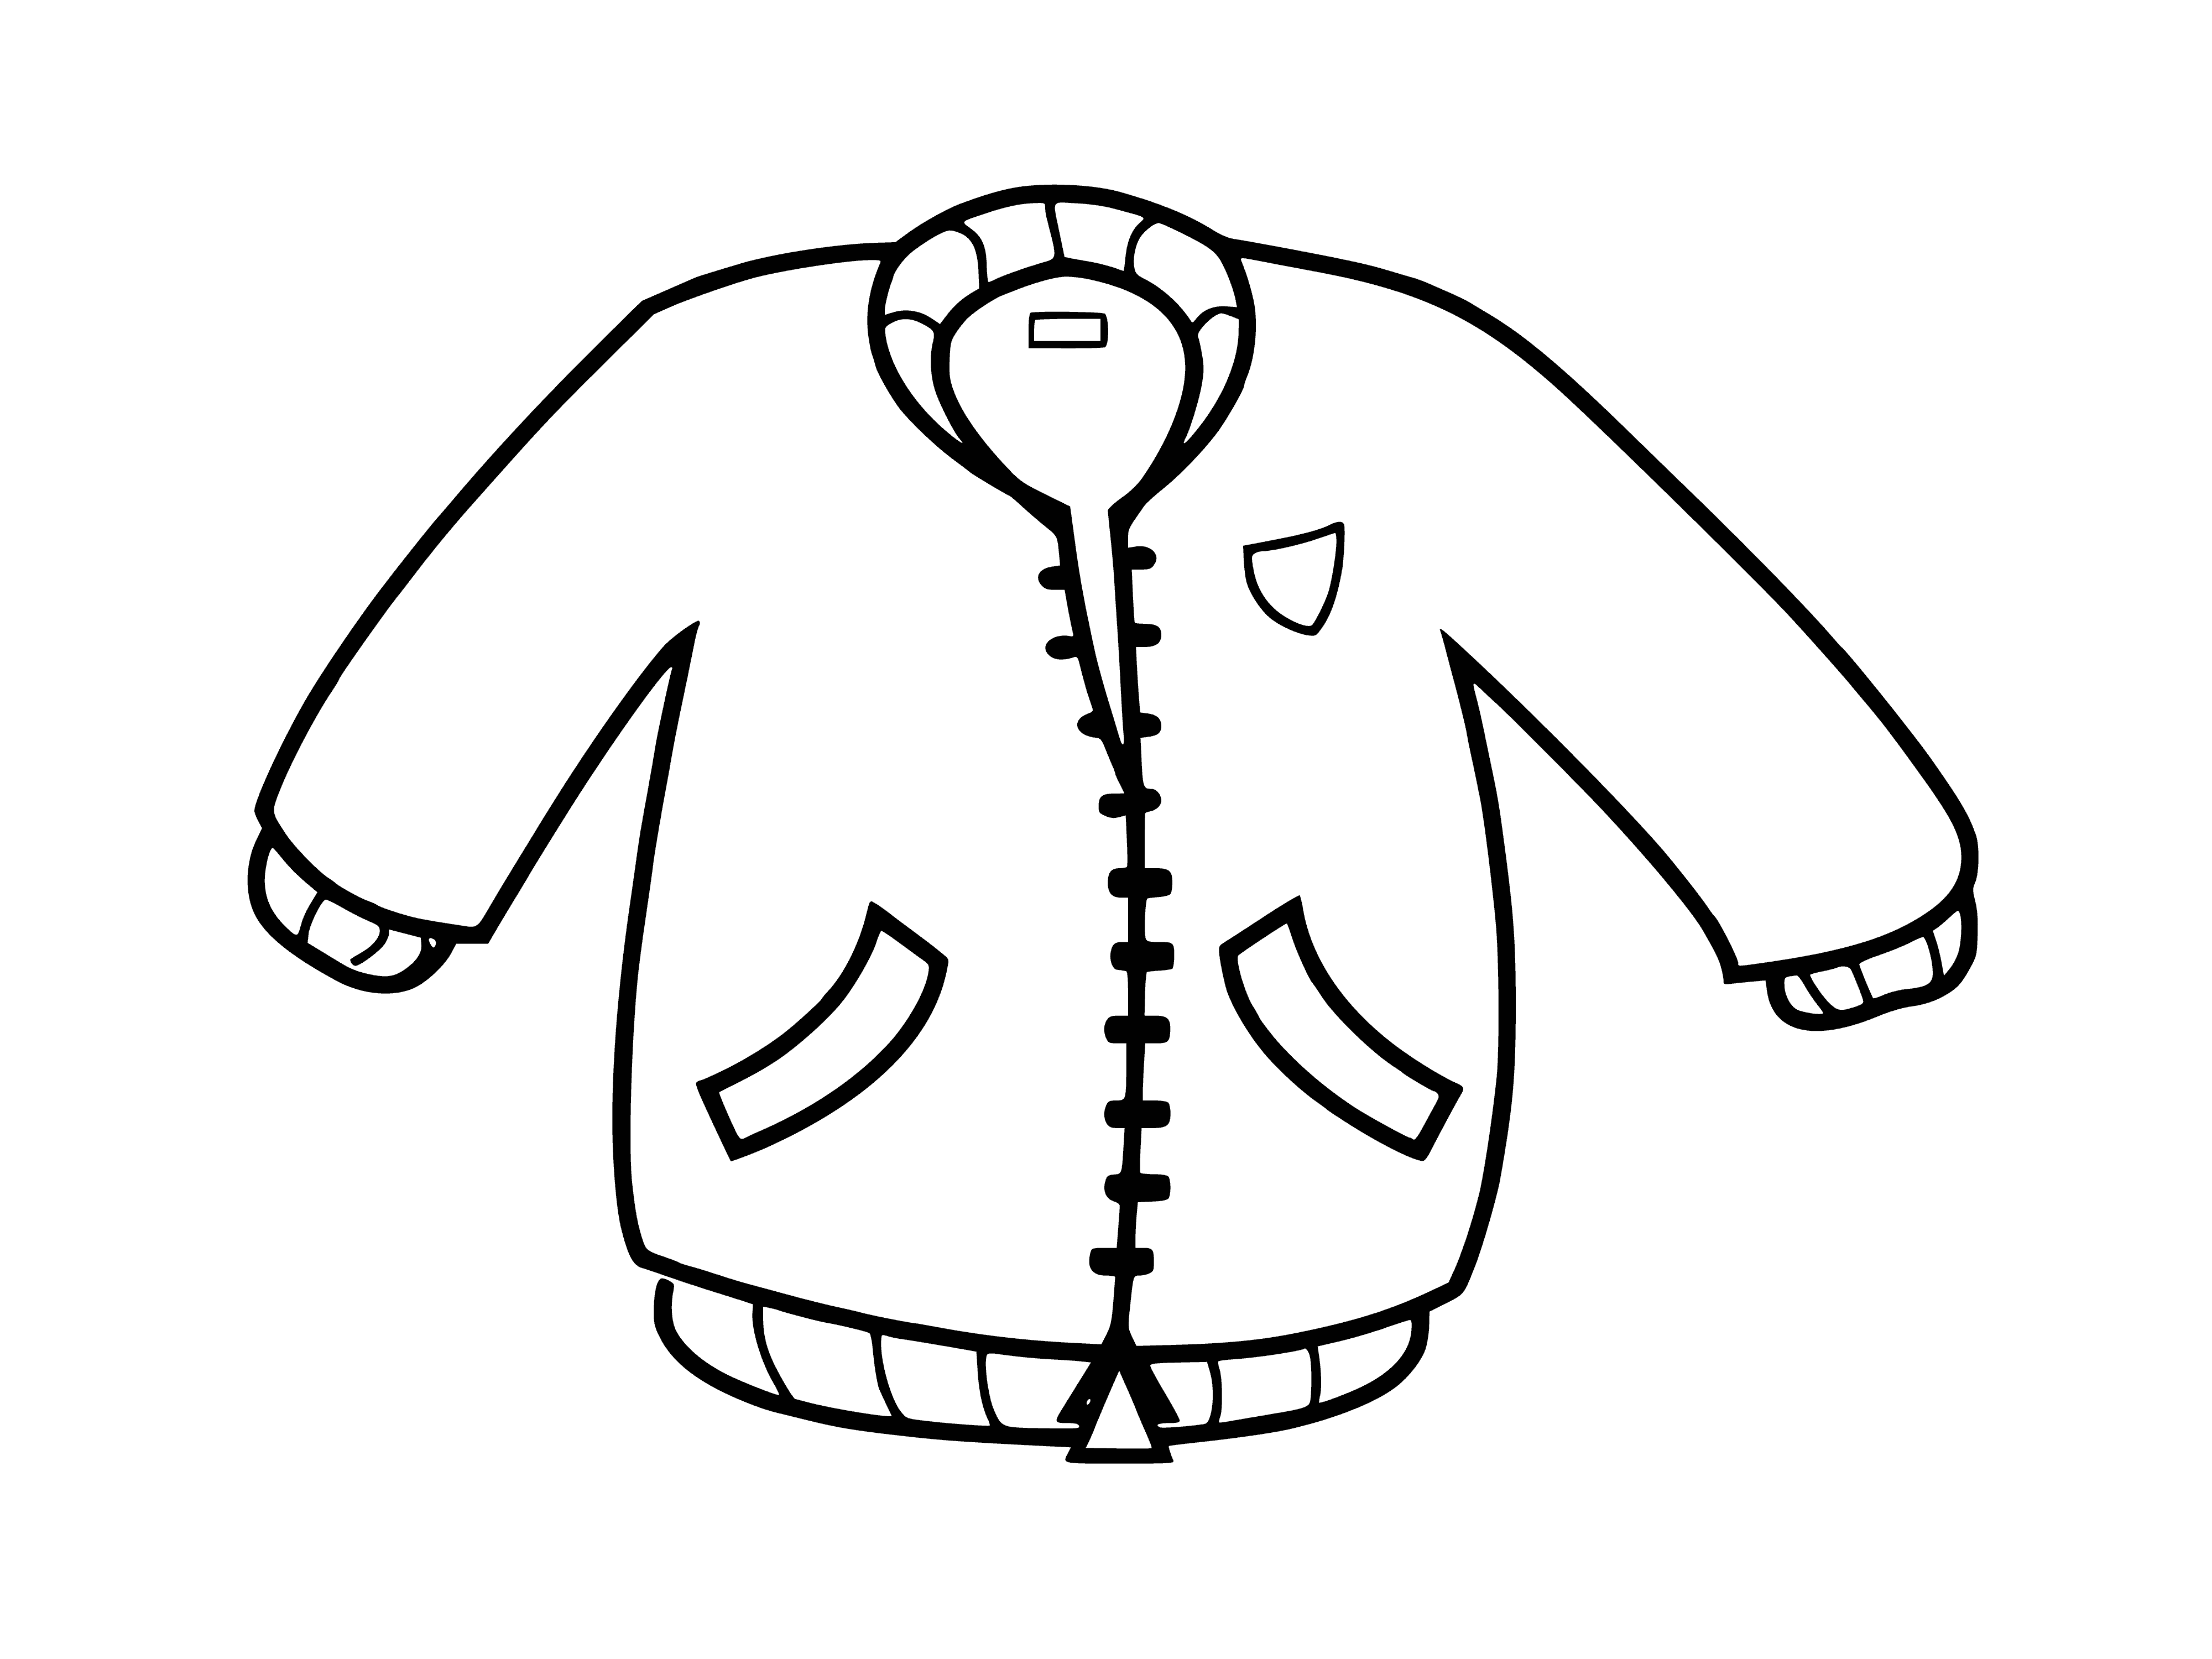 Jacket coloring page